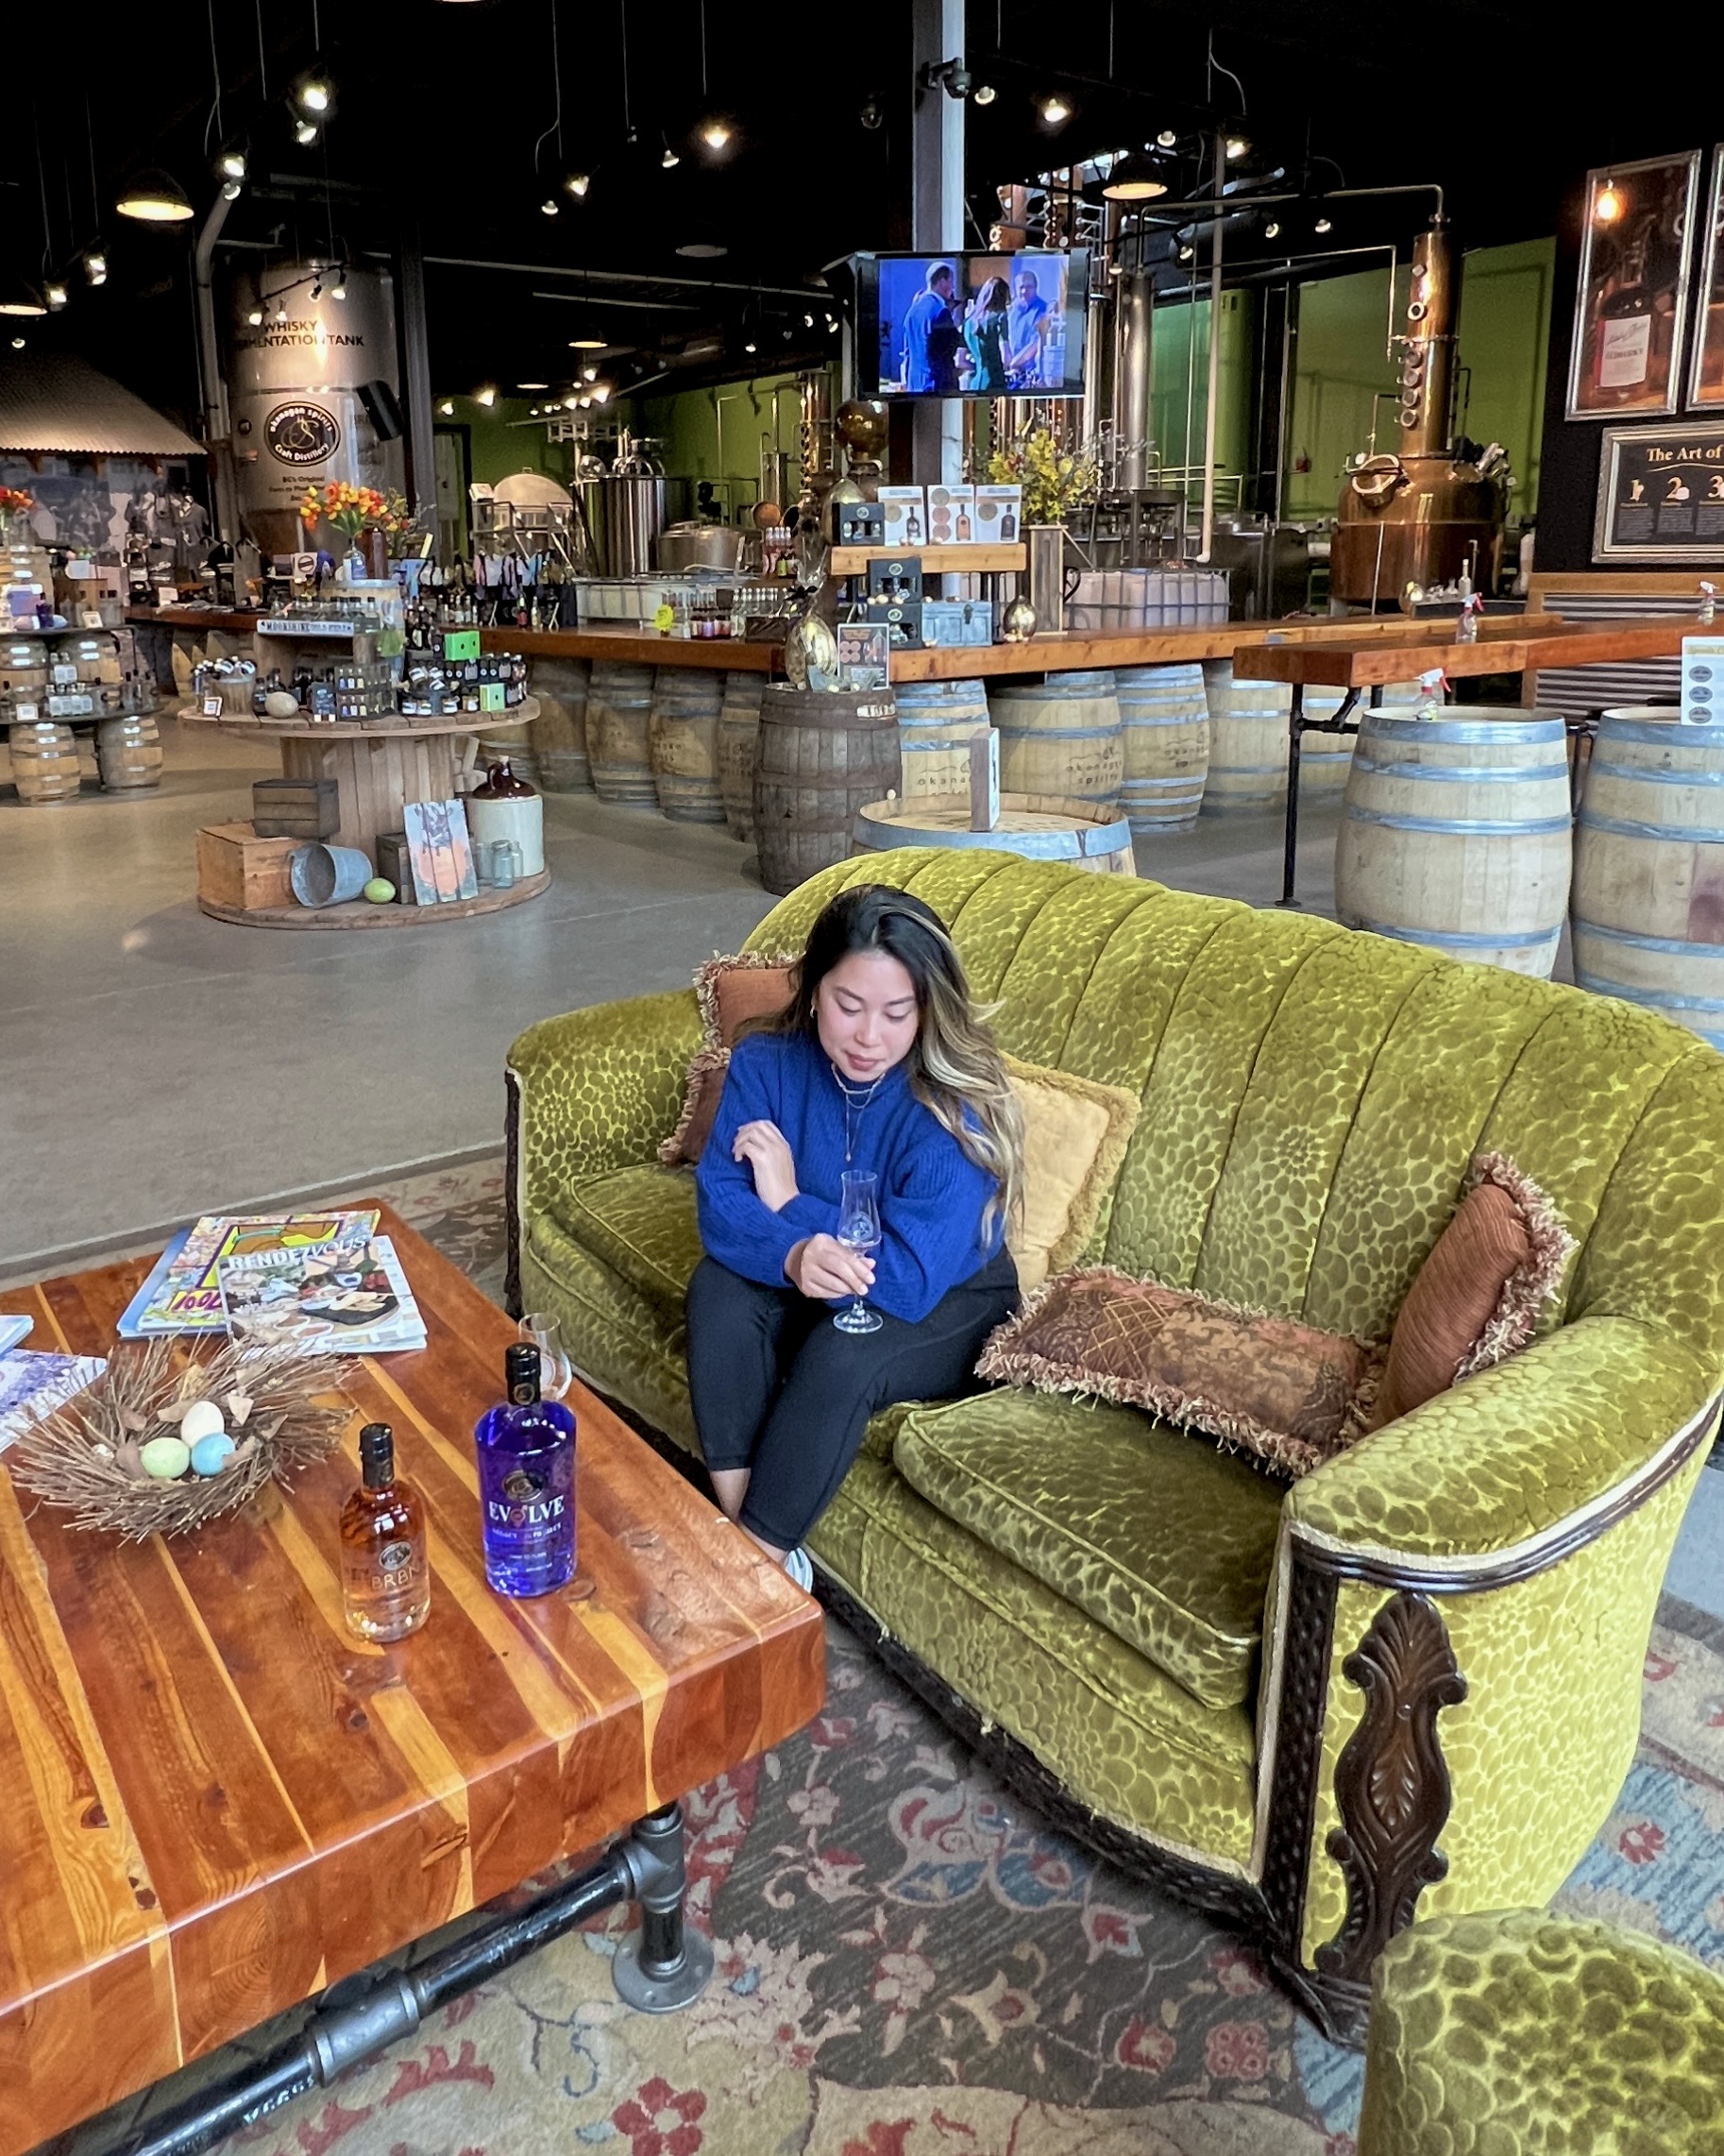 A woman wearing a blue jacket sits on a large green couch at Okanagan Spirits Craft Distillery. She is holding a glass of wine. In front of her is a low wooden table with other bottles on it.